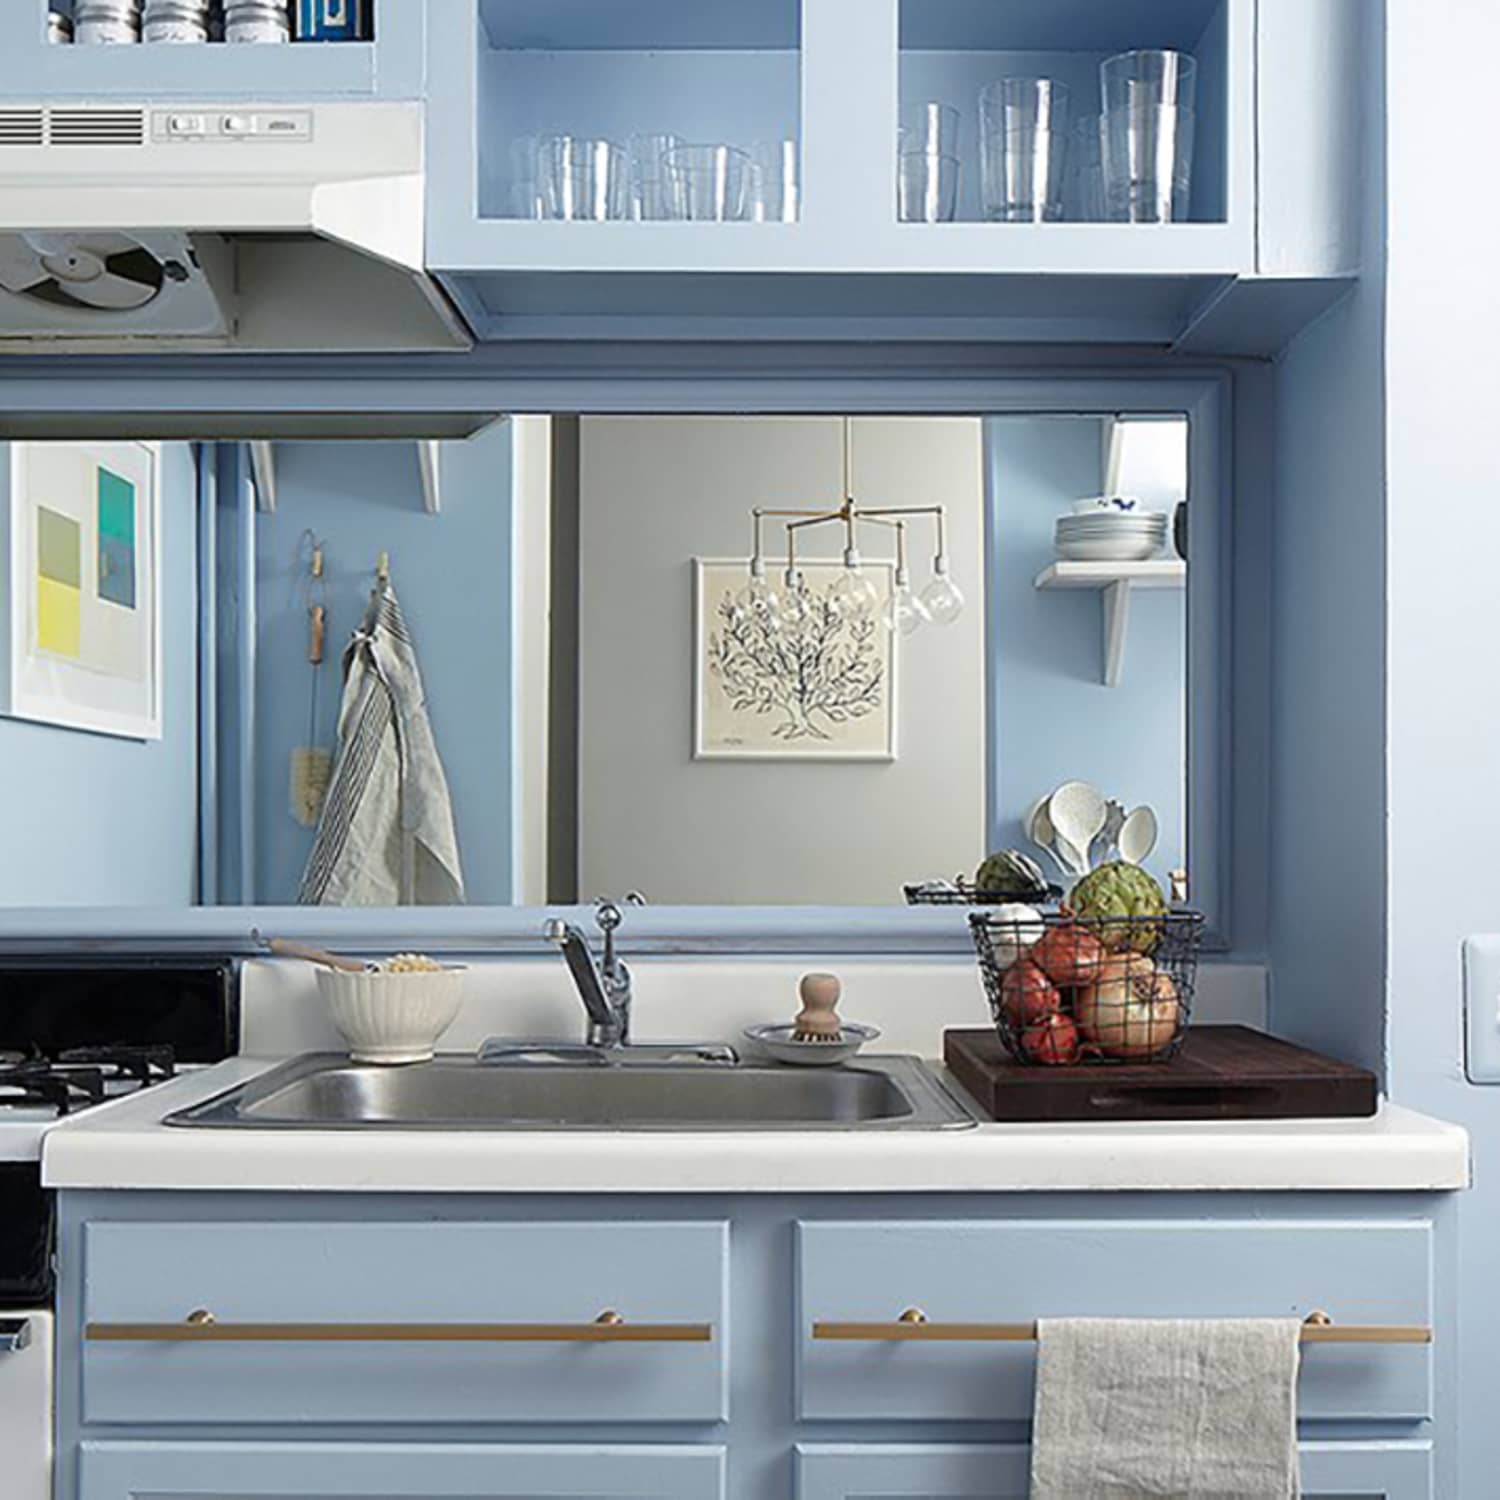 Best Kitchen Paint Colors Of 2021 – Forbes Advisor